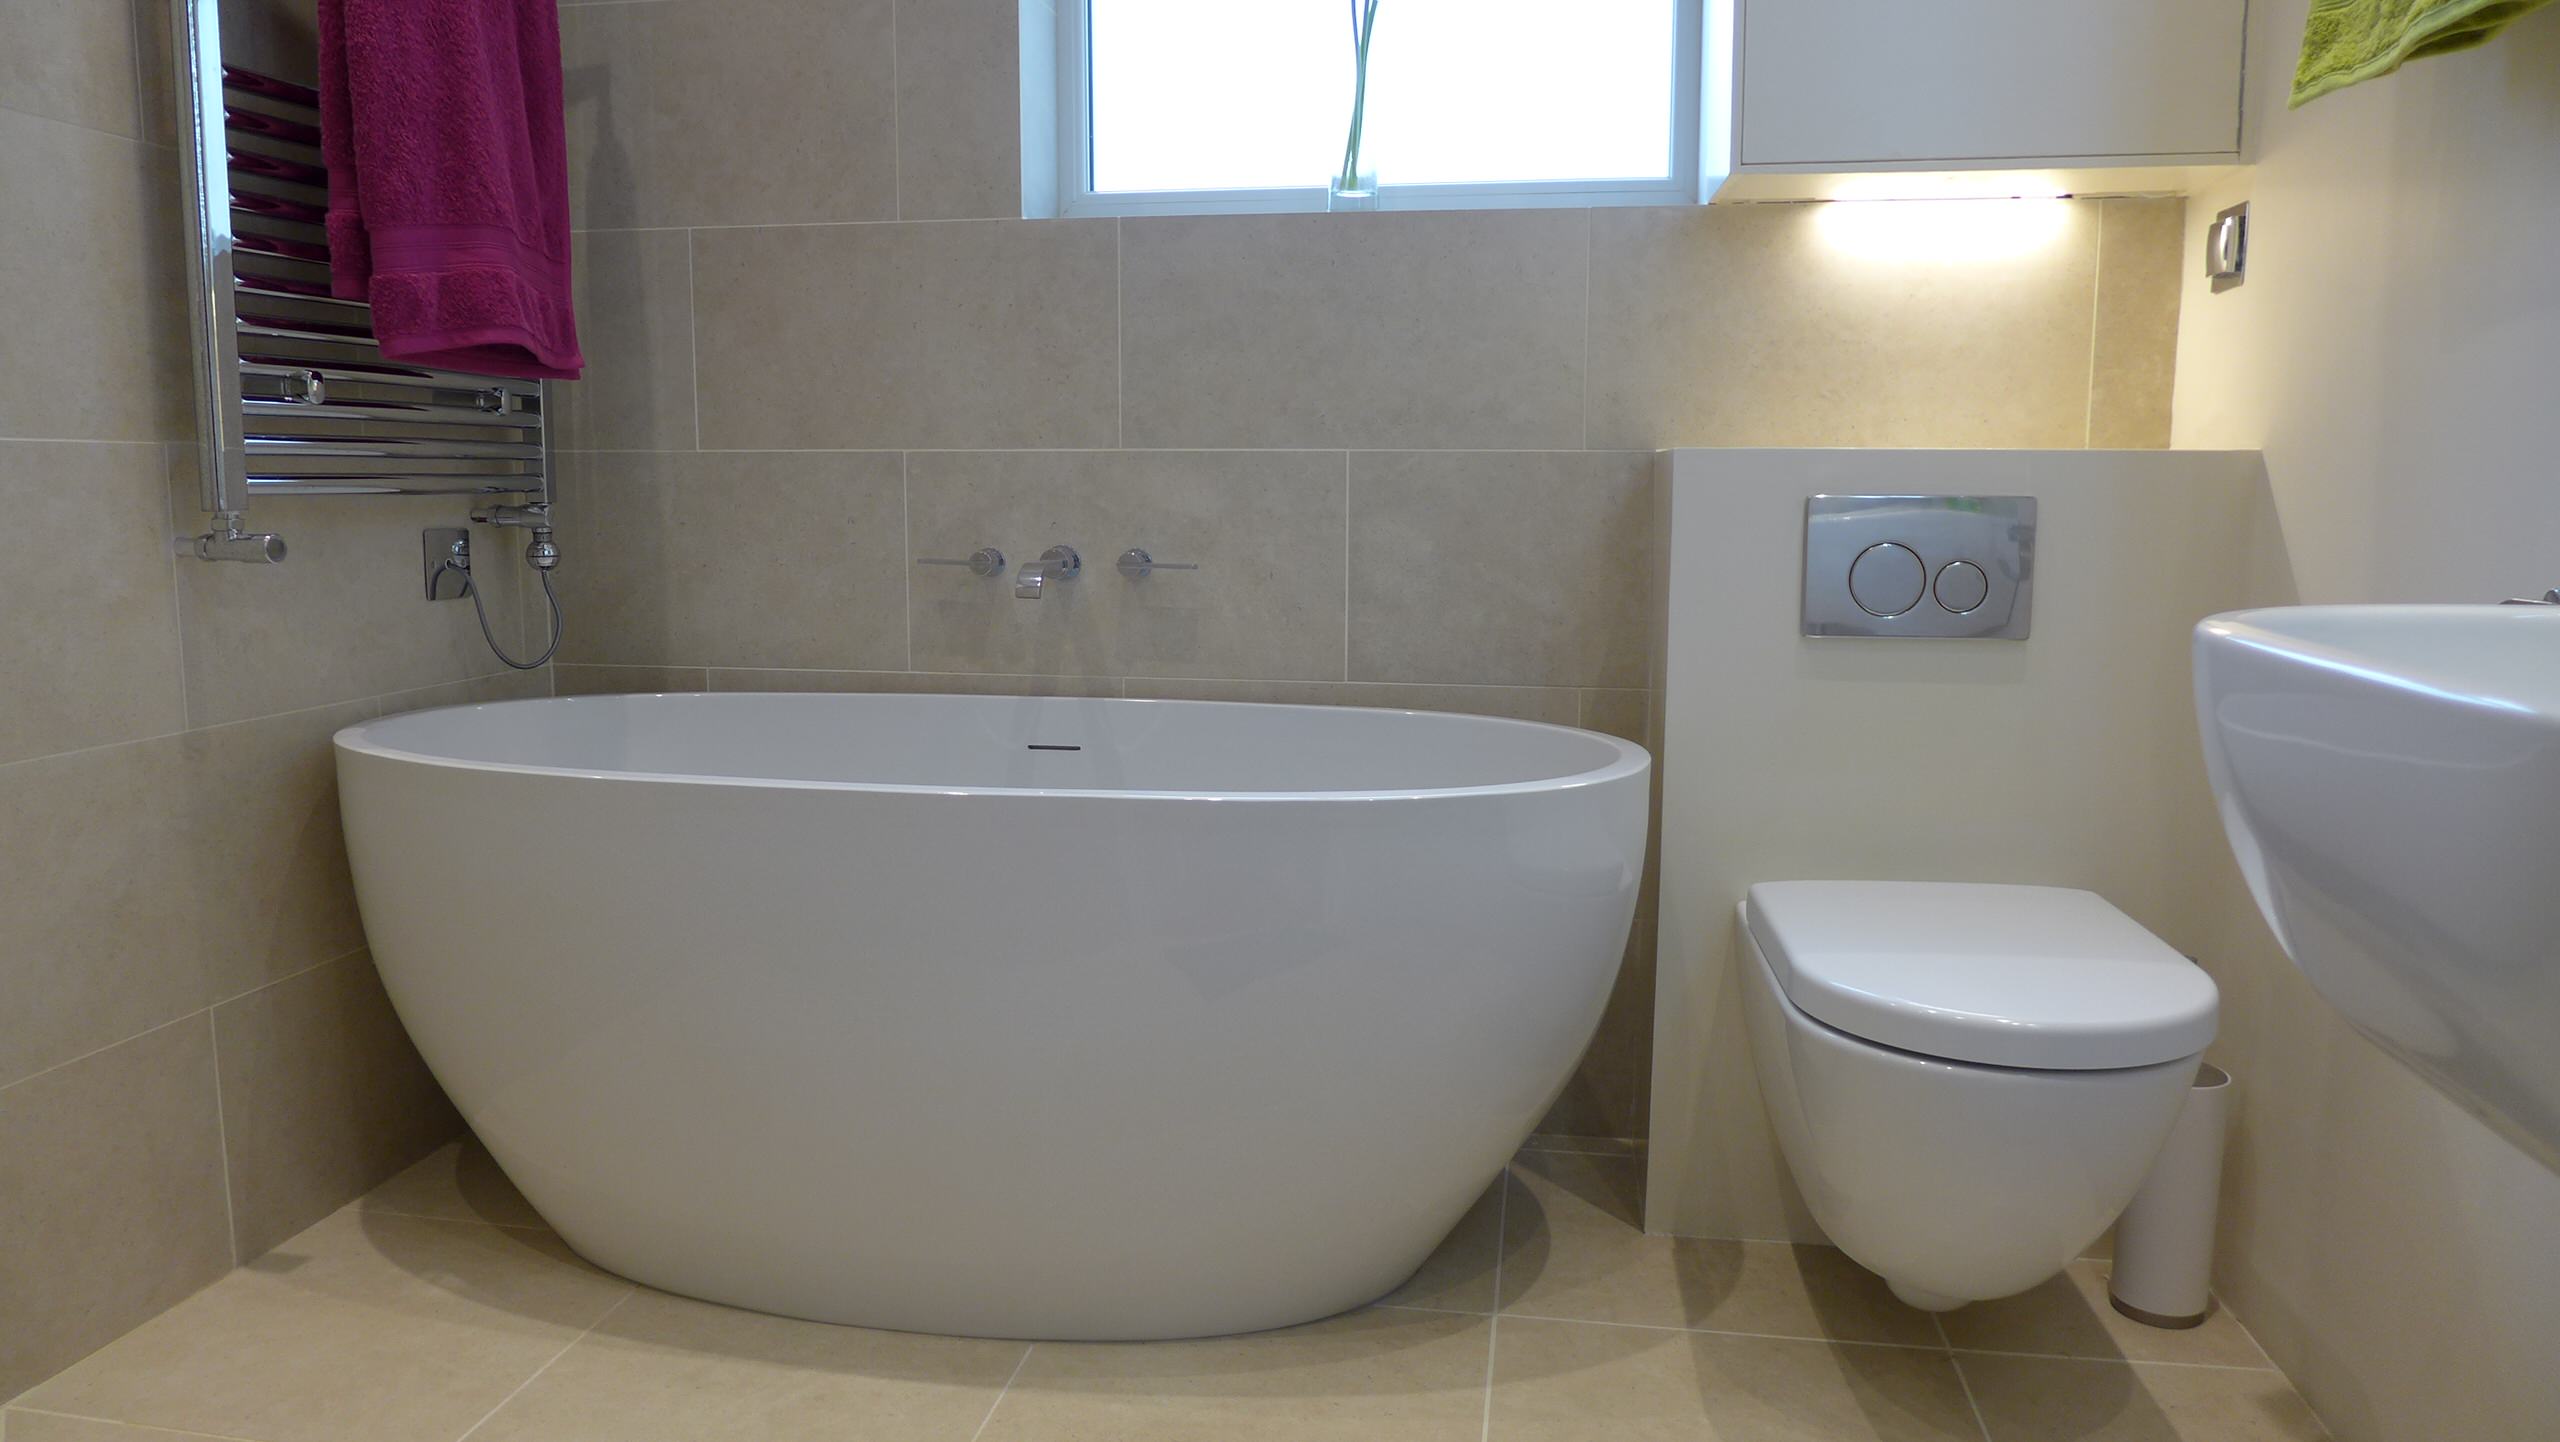 Freestanding Bath In Wet Room, Free Standing Bathtubs For Small Spaces